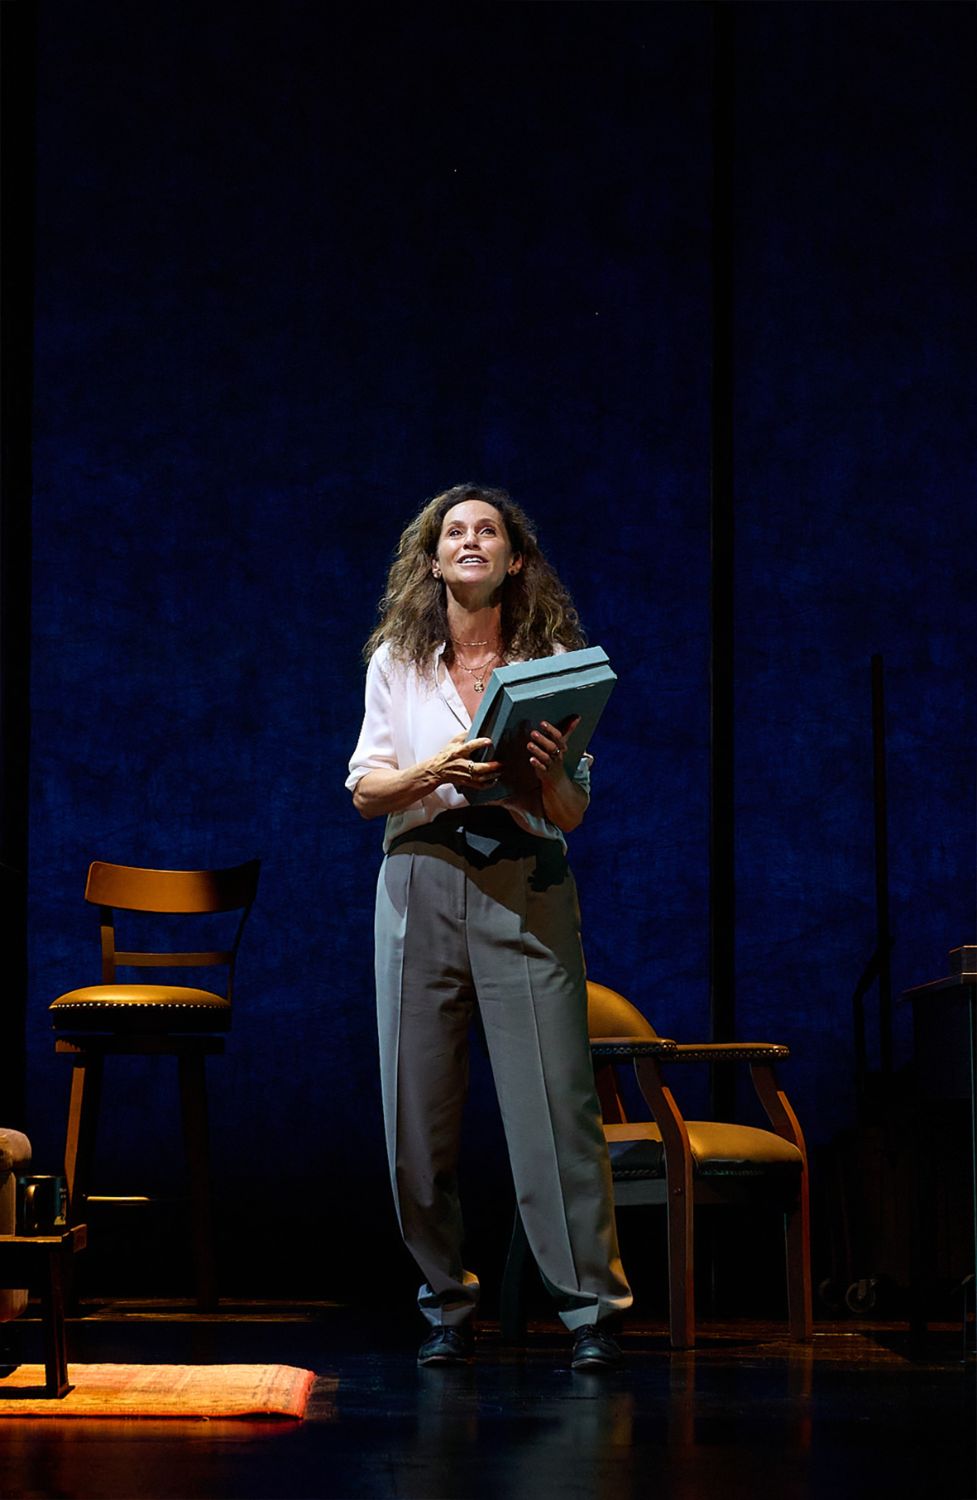 PHOTO: Mike Palma | The South Pasadenan | Amy Brenneman stars in The Sound Inside on stage at Pasadena Playhouse.